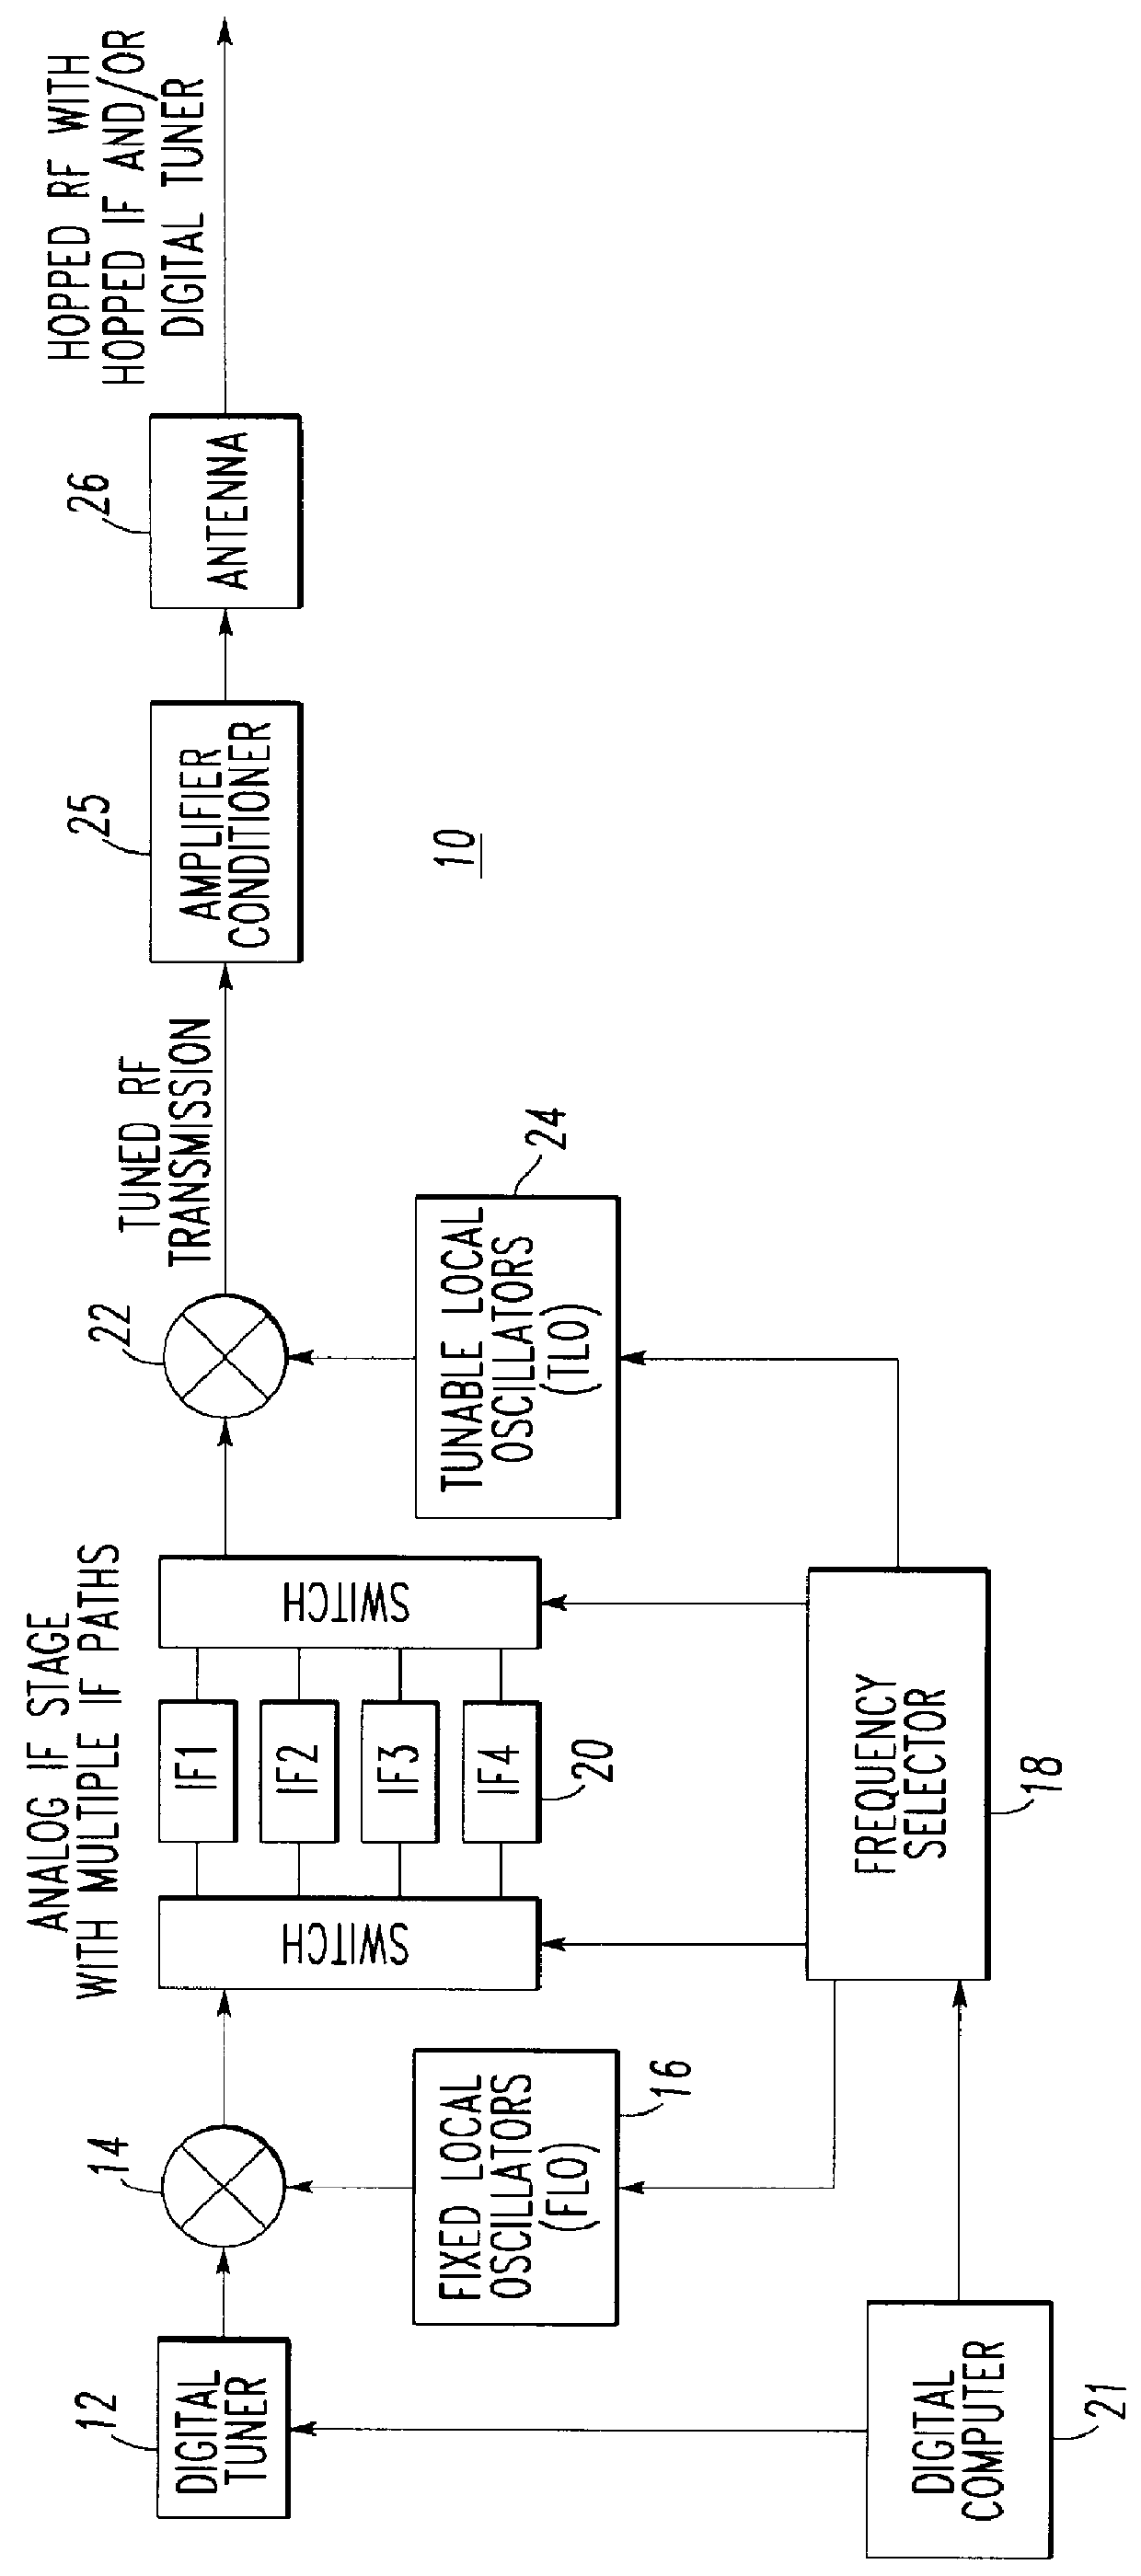 Frequency hopping radio transmitter apparatus and method providing very high communication security